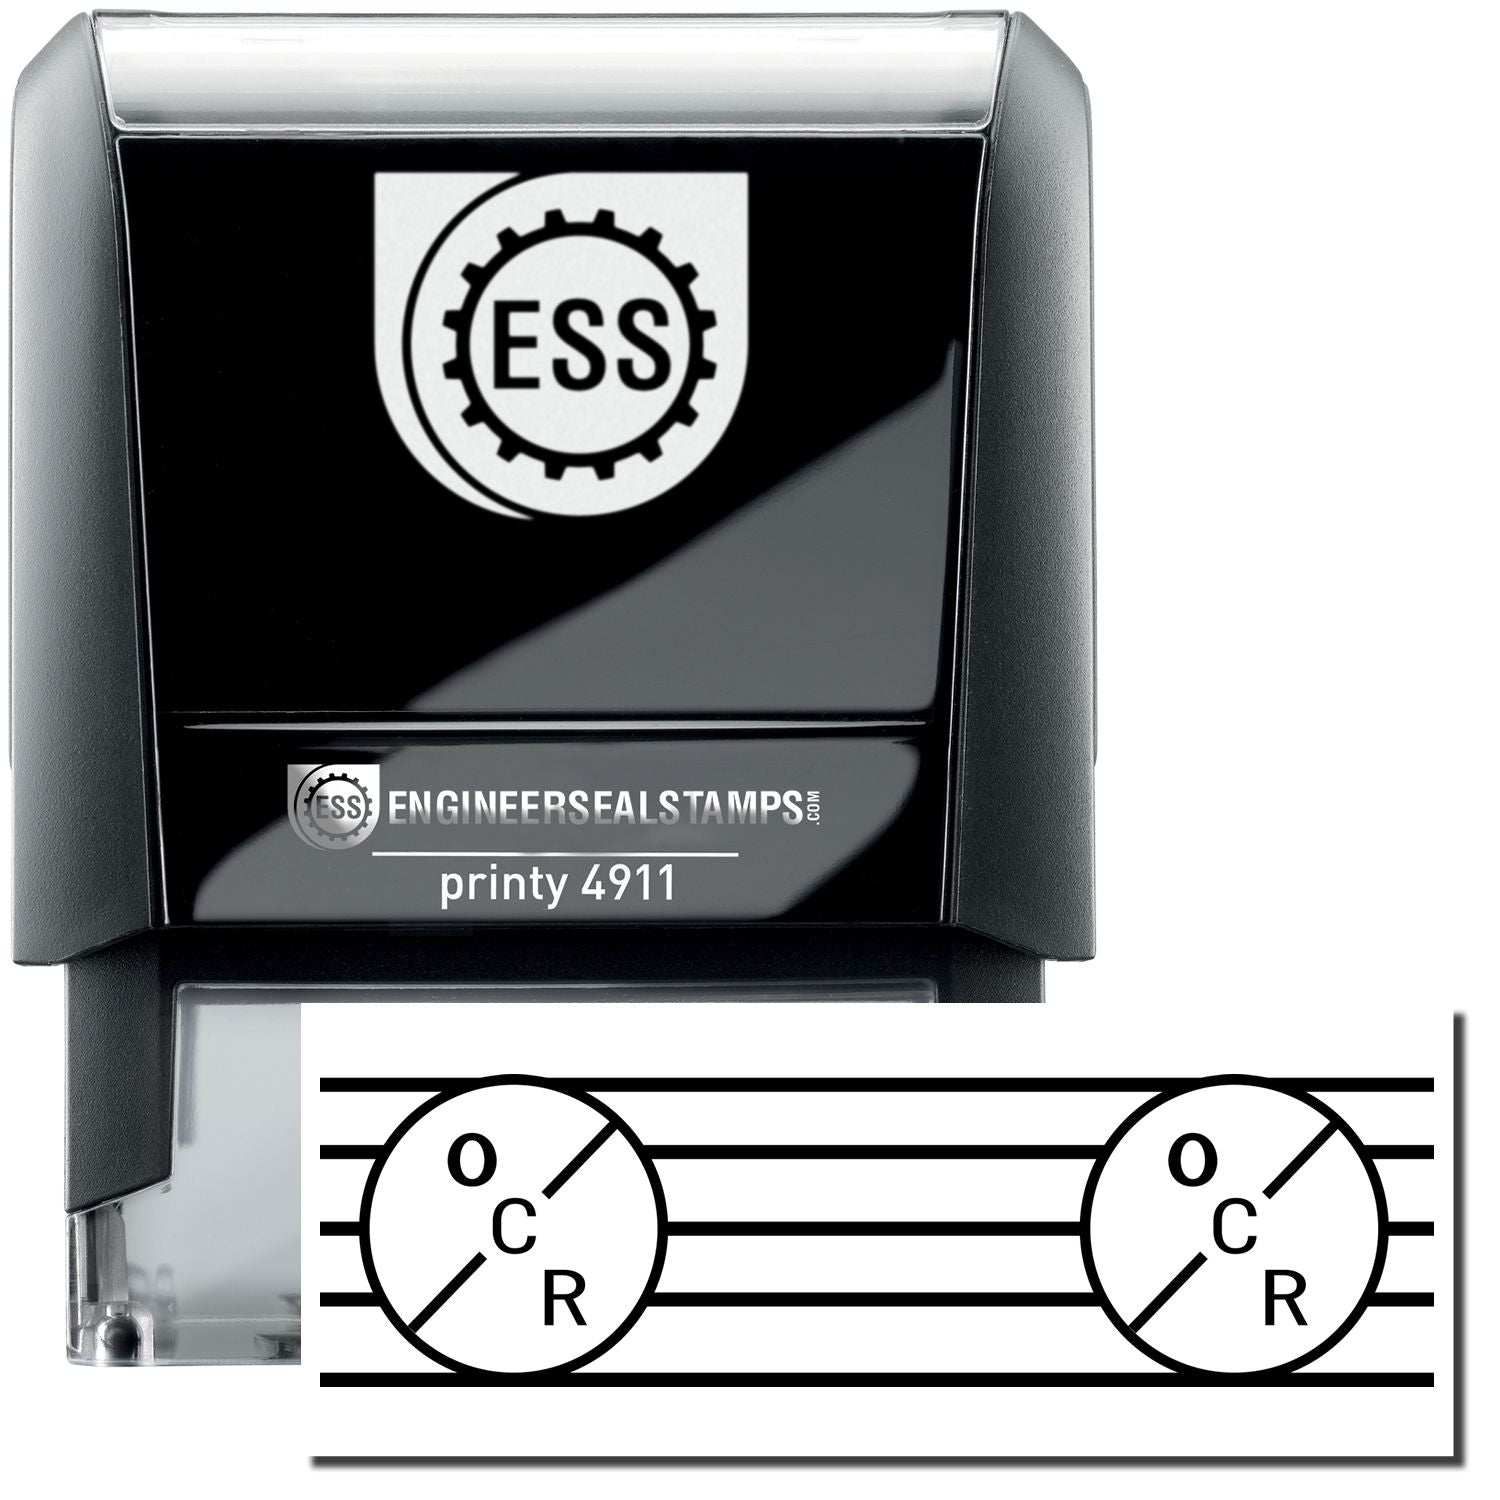 A self-inking stamp with a stamped image showing how the text "OCR" with extra design elements like lines and circles is displayed after stamping.